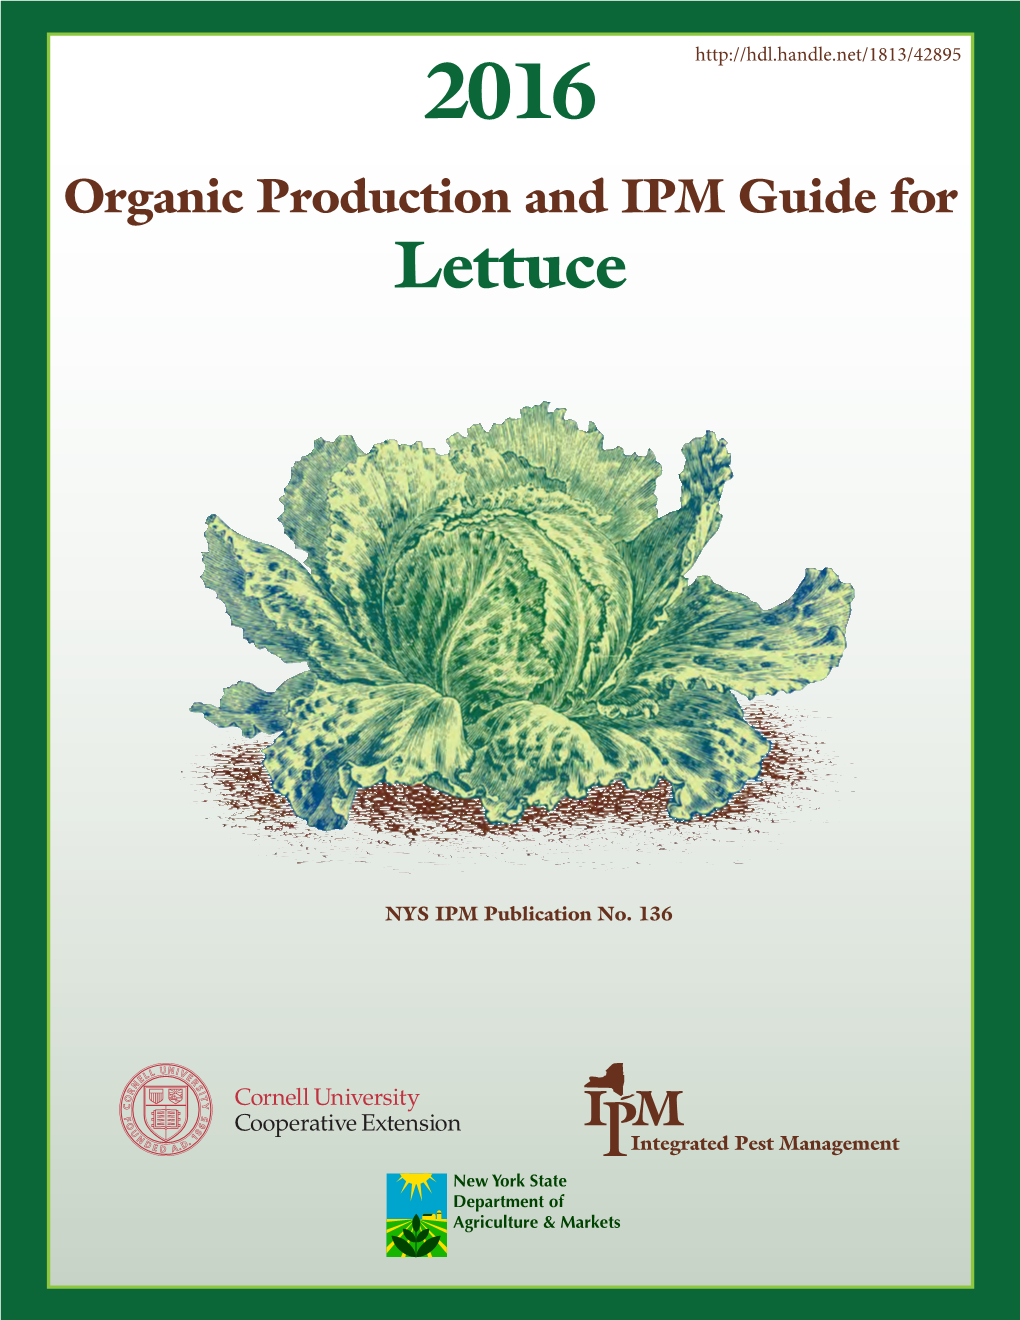 2016 Organic Production and IPM Guide for Lettuce